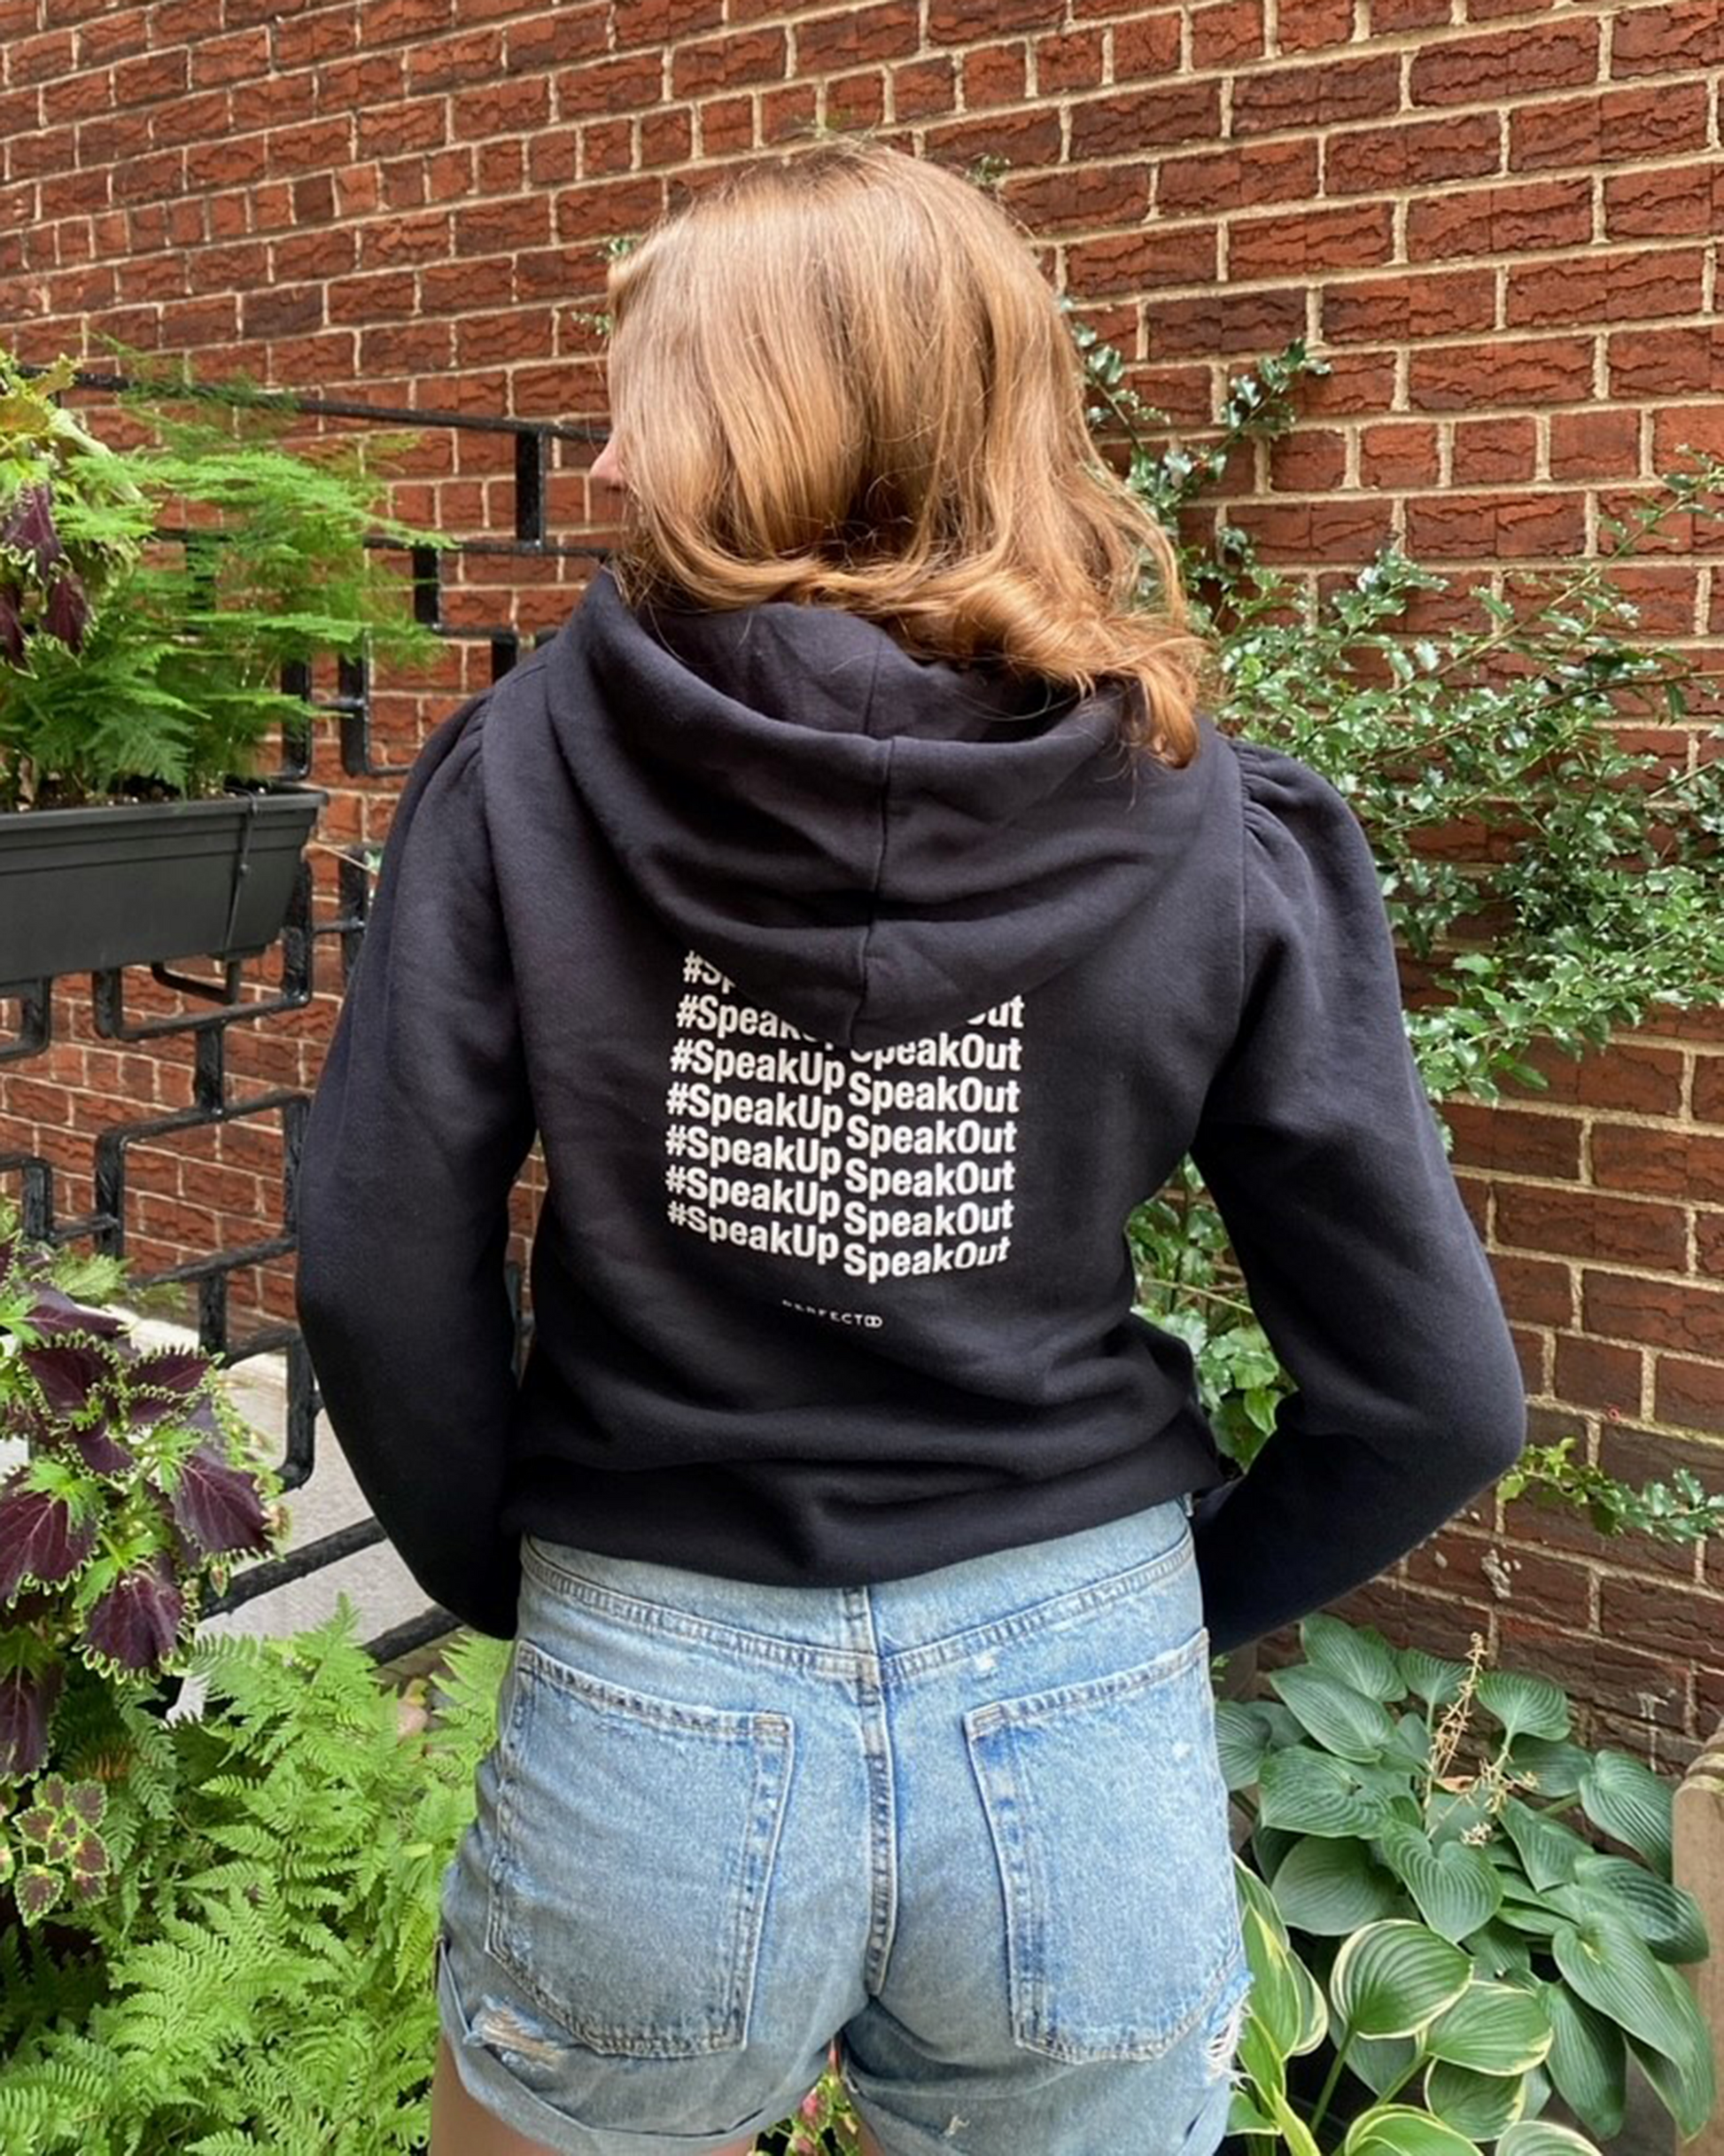 Back detail of black cotton fleece puff sleeve sweatshirt on model wearing blue jean shorts in front of brick wall and plants